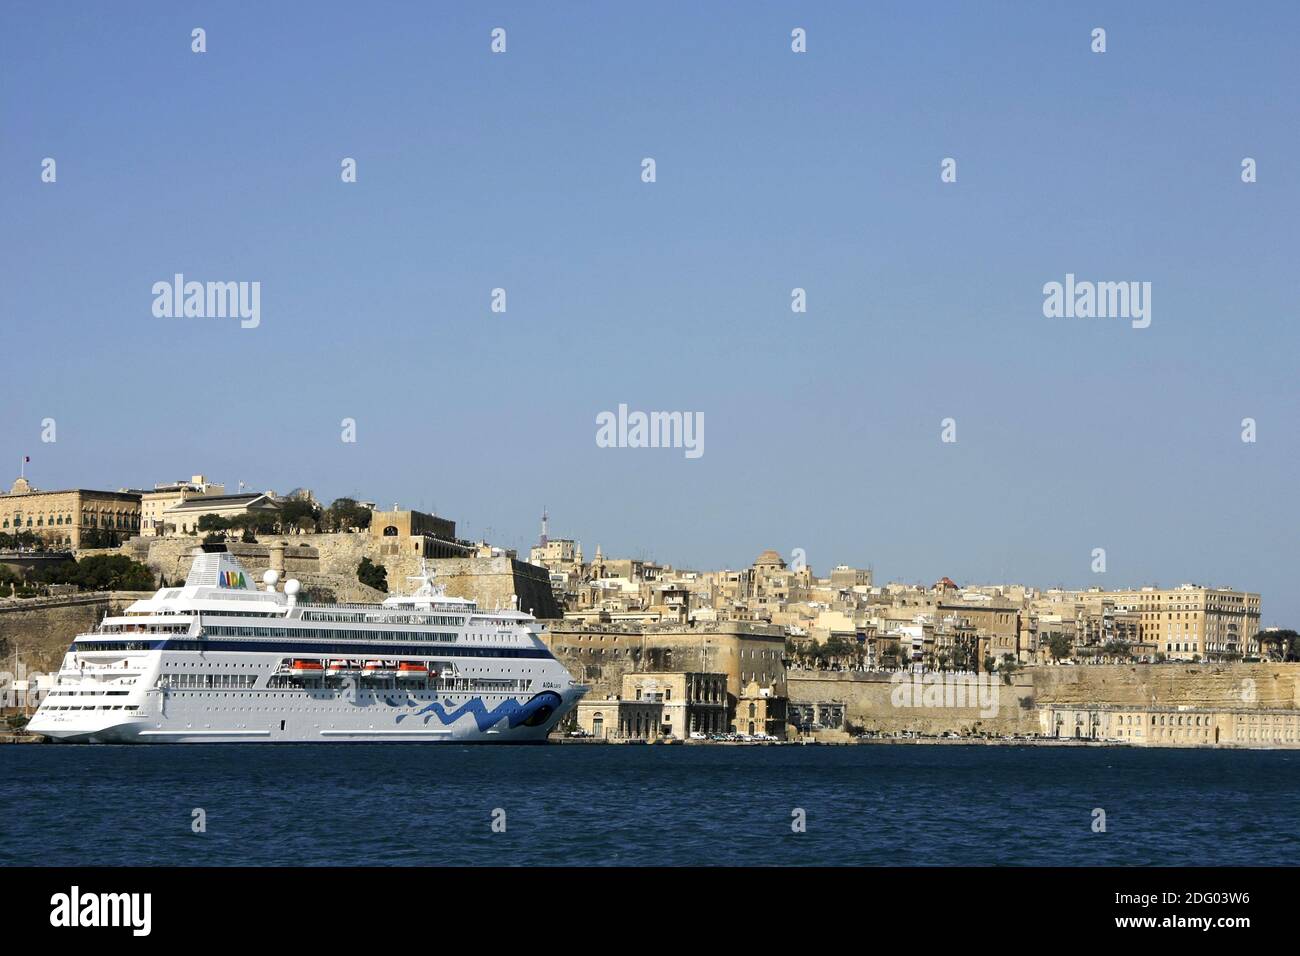 The Aida in the port of Valetta Stock Photo